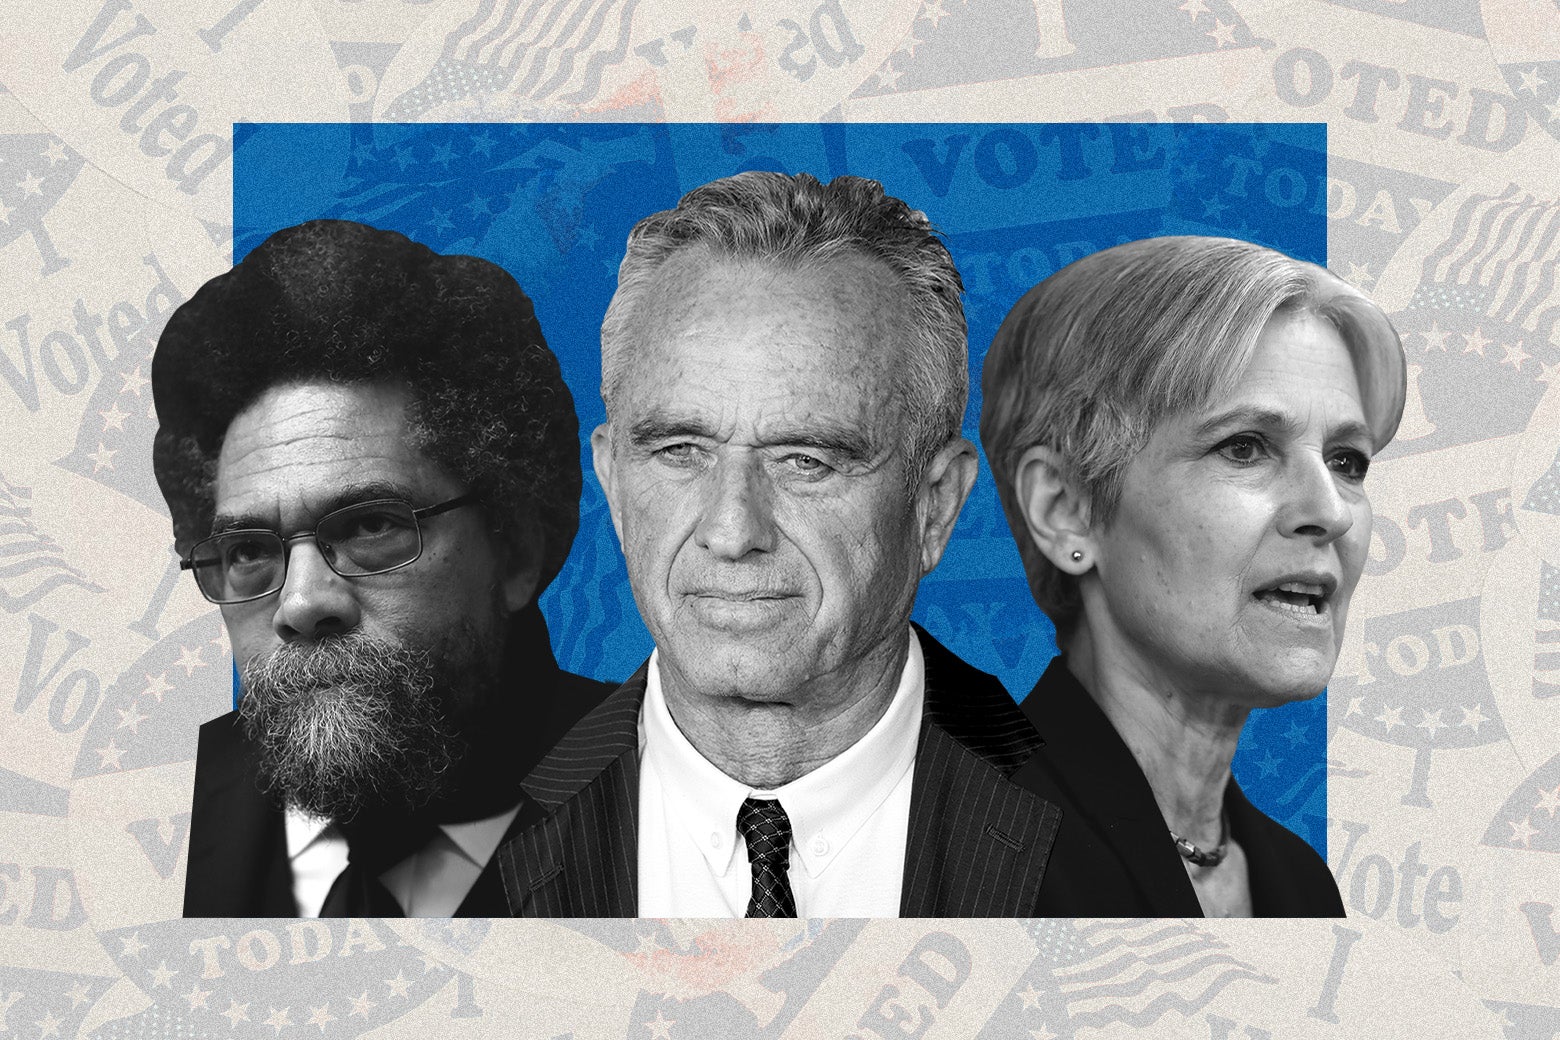 Third-party candidates Cornel West, Robert F. Kennedy Jr., and Jill Stein, over a background of Election Day "I Voted" stickers.